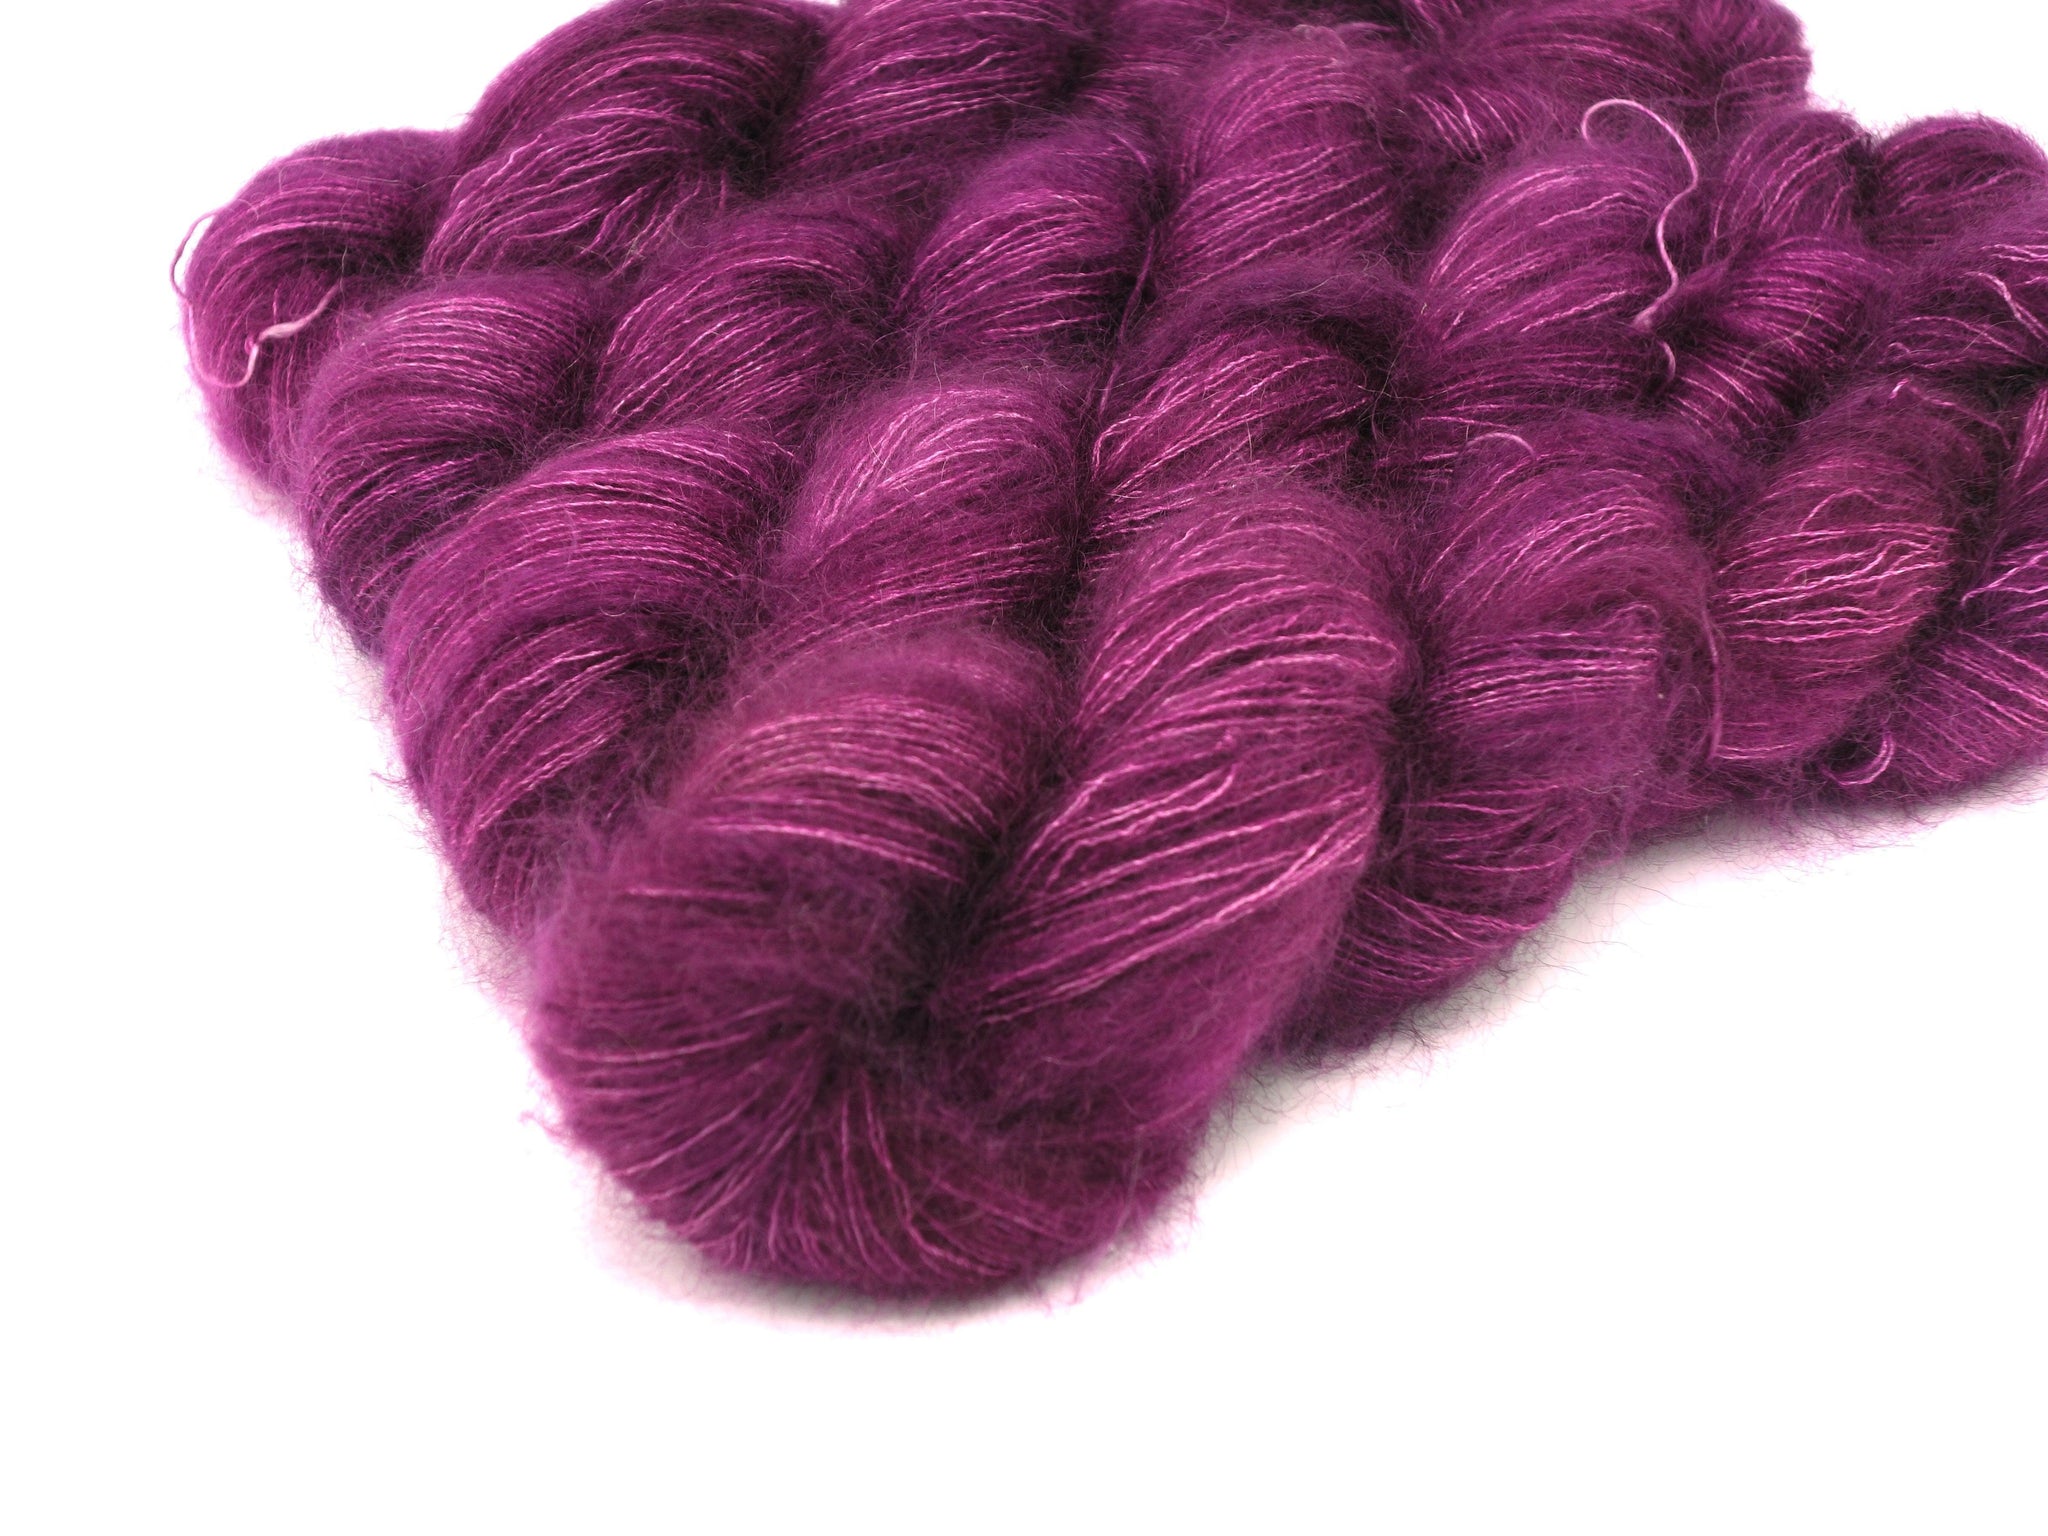 Skeins of Murky Depths Mirage Lucia, a bright jammy tonally variegated purple. 